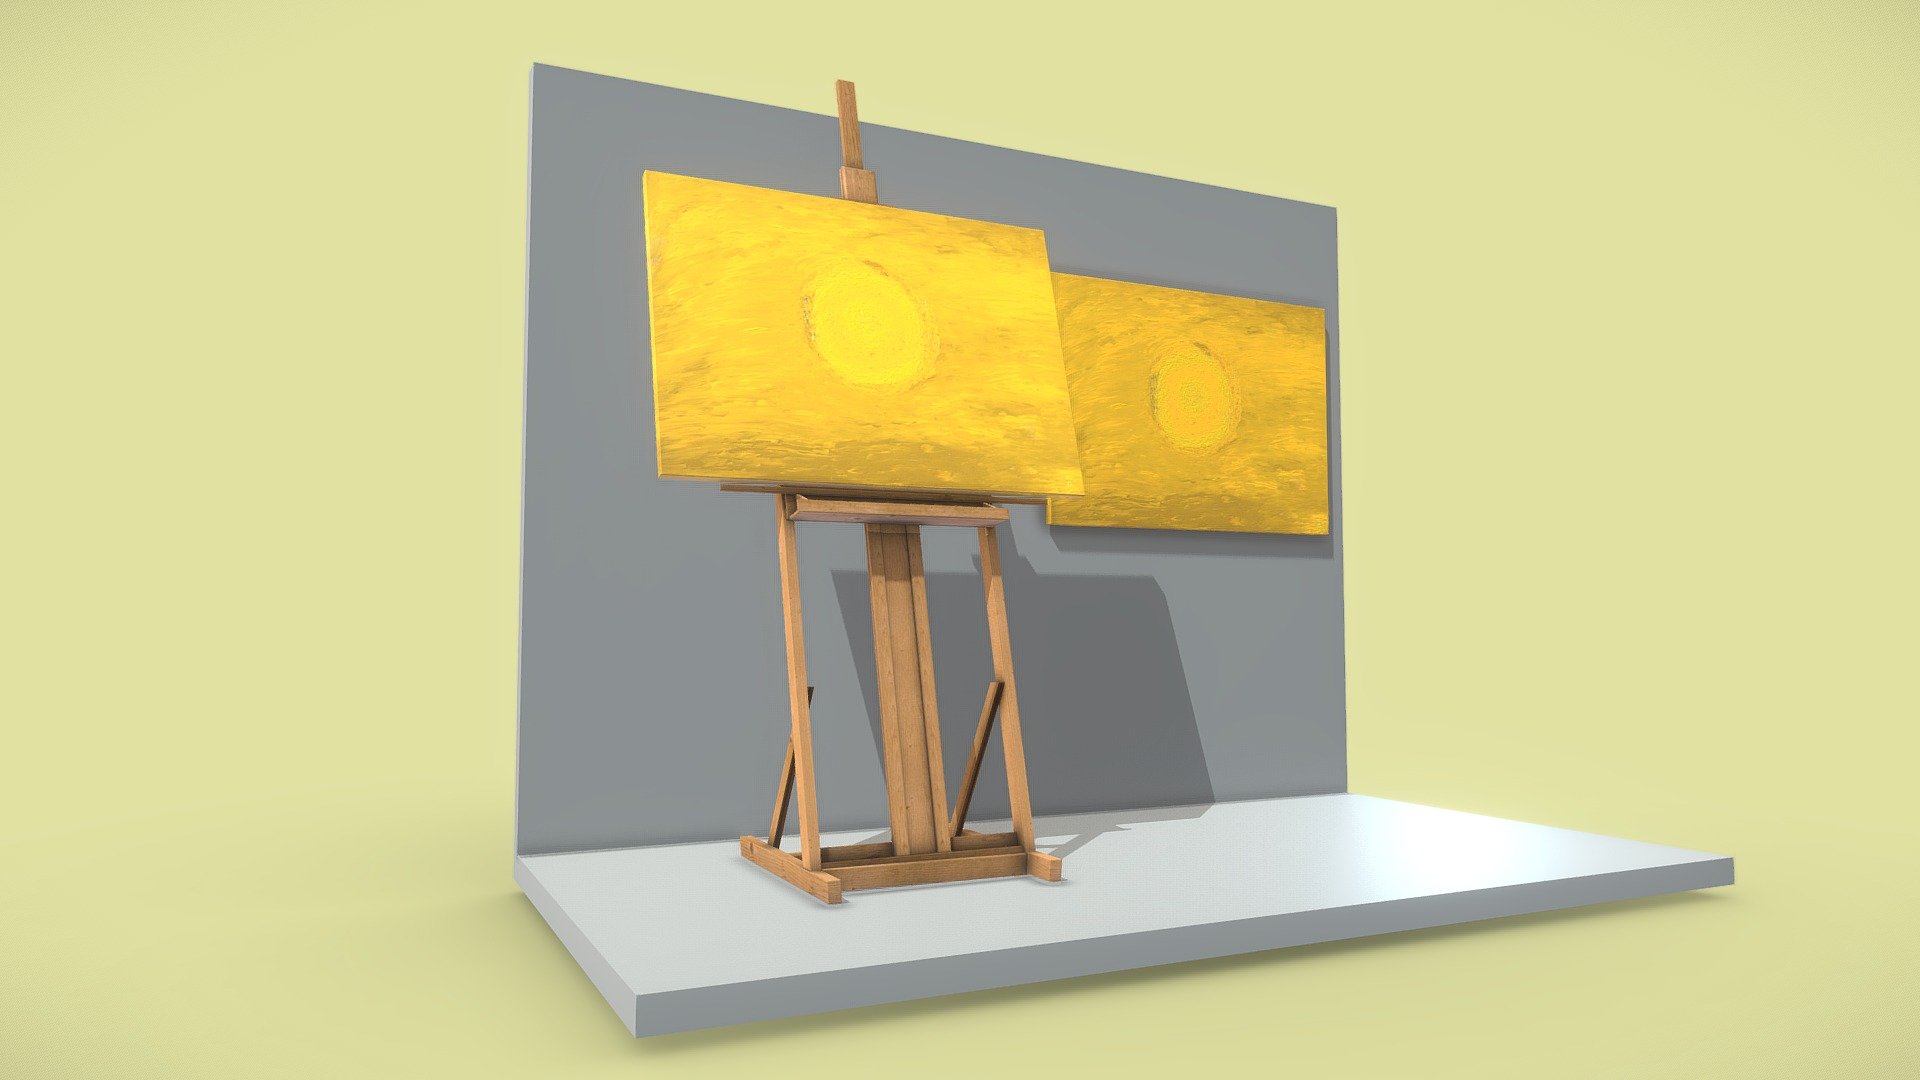 Yellow Circle / Gelber Kreis 

Painted by Dirk John 2014.



Picture format:




7:5



Object details: 

Oil Painting:




Quads 110

Triangles 220

Vertices 112

Edges 220

Easel:




Quads 131

Triangles 246

Vertices 176

Edges 272

Wall and floor:




Quads 10

Triangles 20

Vertices 12

Edges 20



** PBR texture maps:** 




4096 x 4096 



3D-Model-Formats:   




VRML (.wrl, .wrz) 

X3D (.x3d) 

3D Studio (.3ds) 

Collada (.dae) 

DXF (.dxf) 

Autodesk FBX (.fbx) 

Agisoft Photoscan (.ply) 

Stereolithography (.stl) 

OBJ (.obj, .mtl) 

Blender(.blend) 2.79b and 2.8

DirectX (.X)

Blender 2.82 and 2.79b
 - Oil Painting - Yellow Circle - Buy Royalty Free 3D model by VIS-All-3D (@VIS-All) 3d model